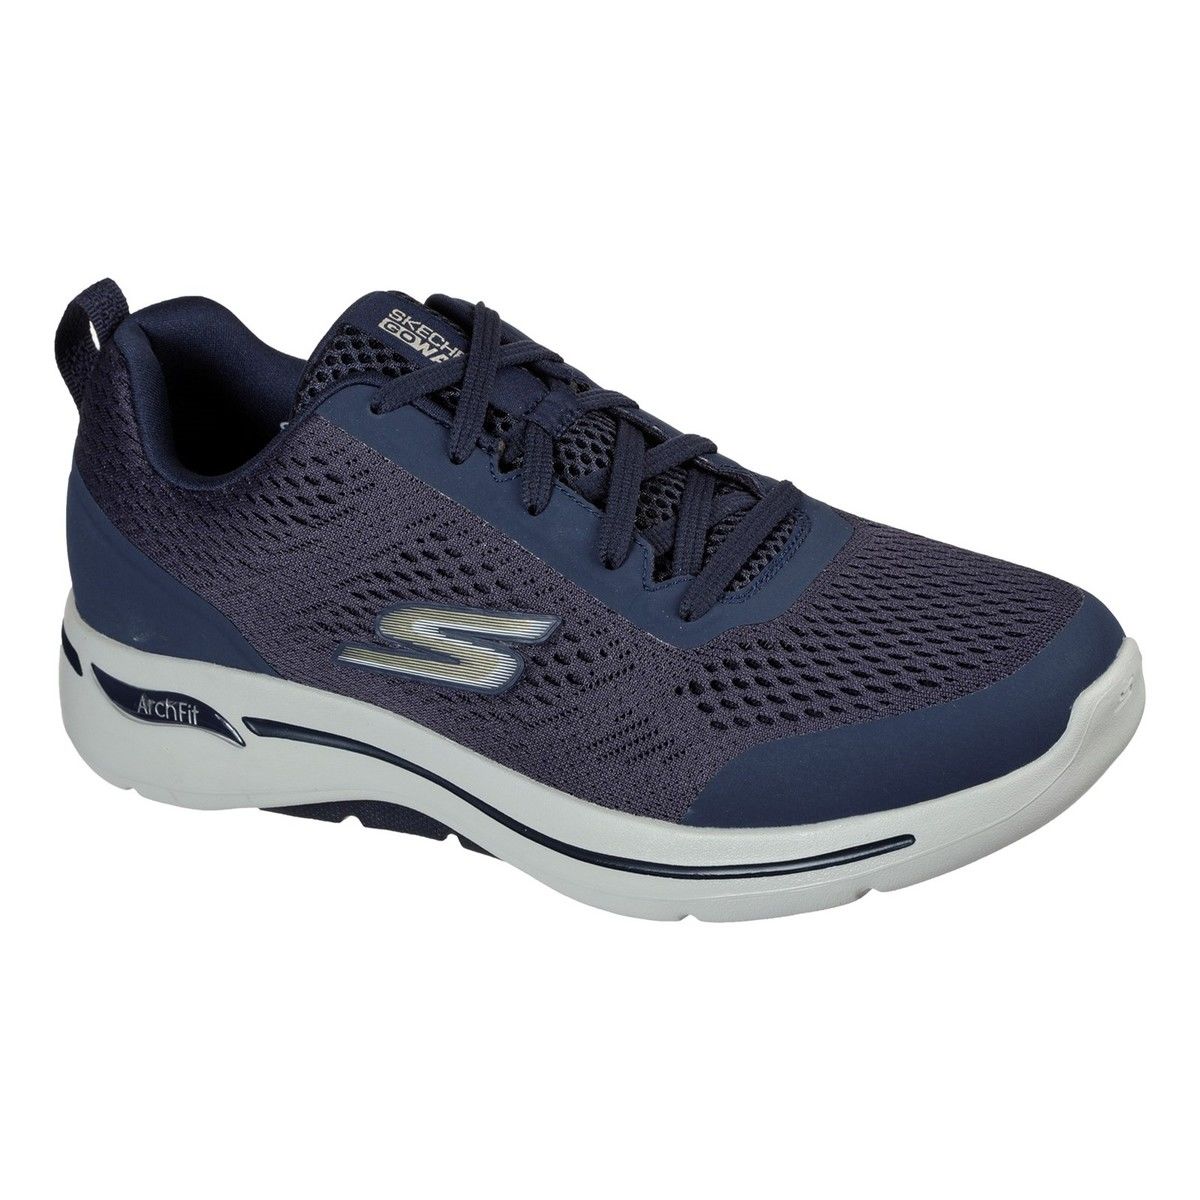 Skechers Go Walk Arch Fit Navy Gold Mens Trainers 216116 In Size 7 In Plain Navy Gold